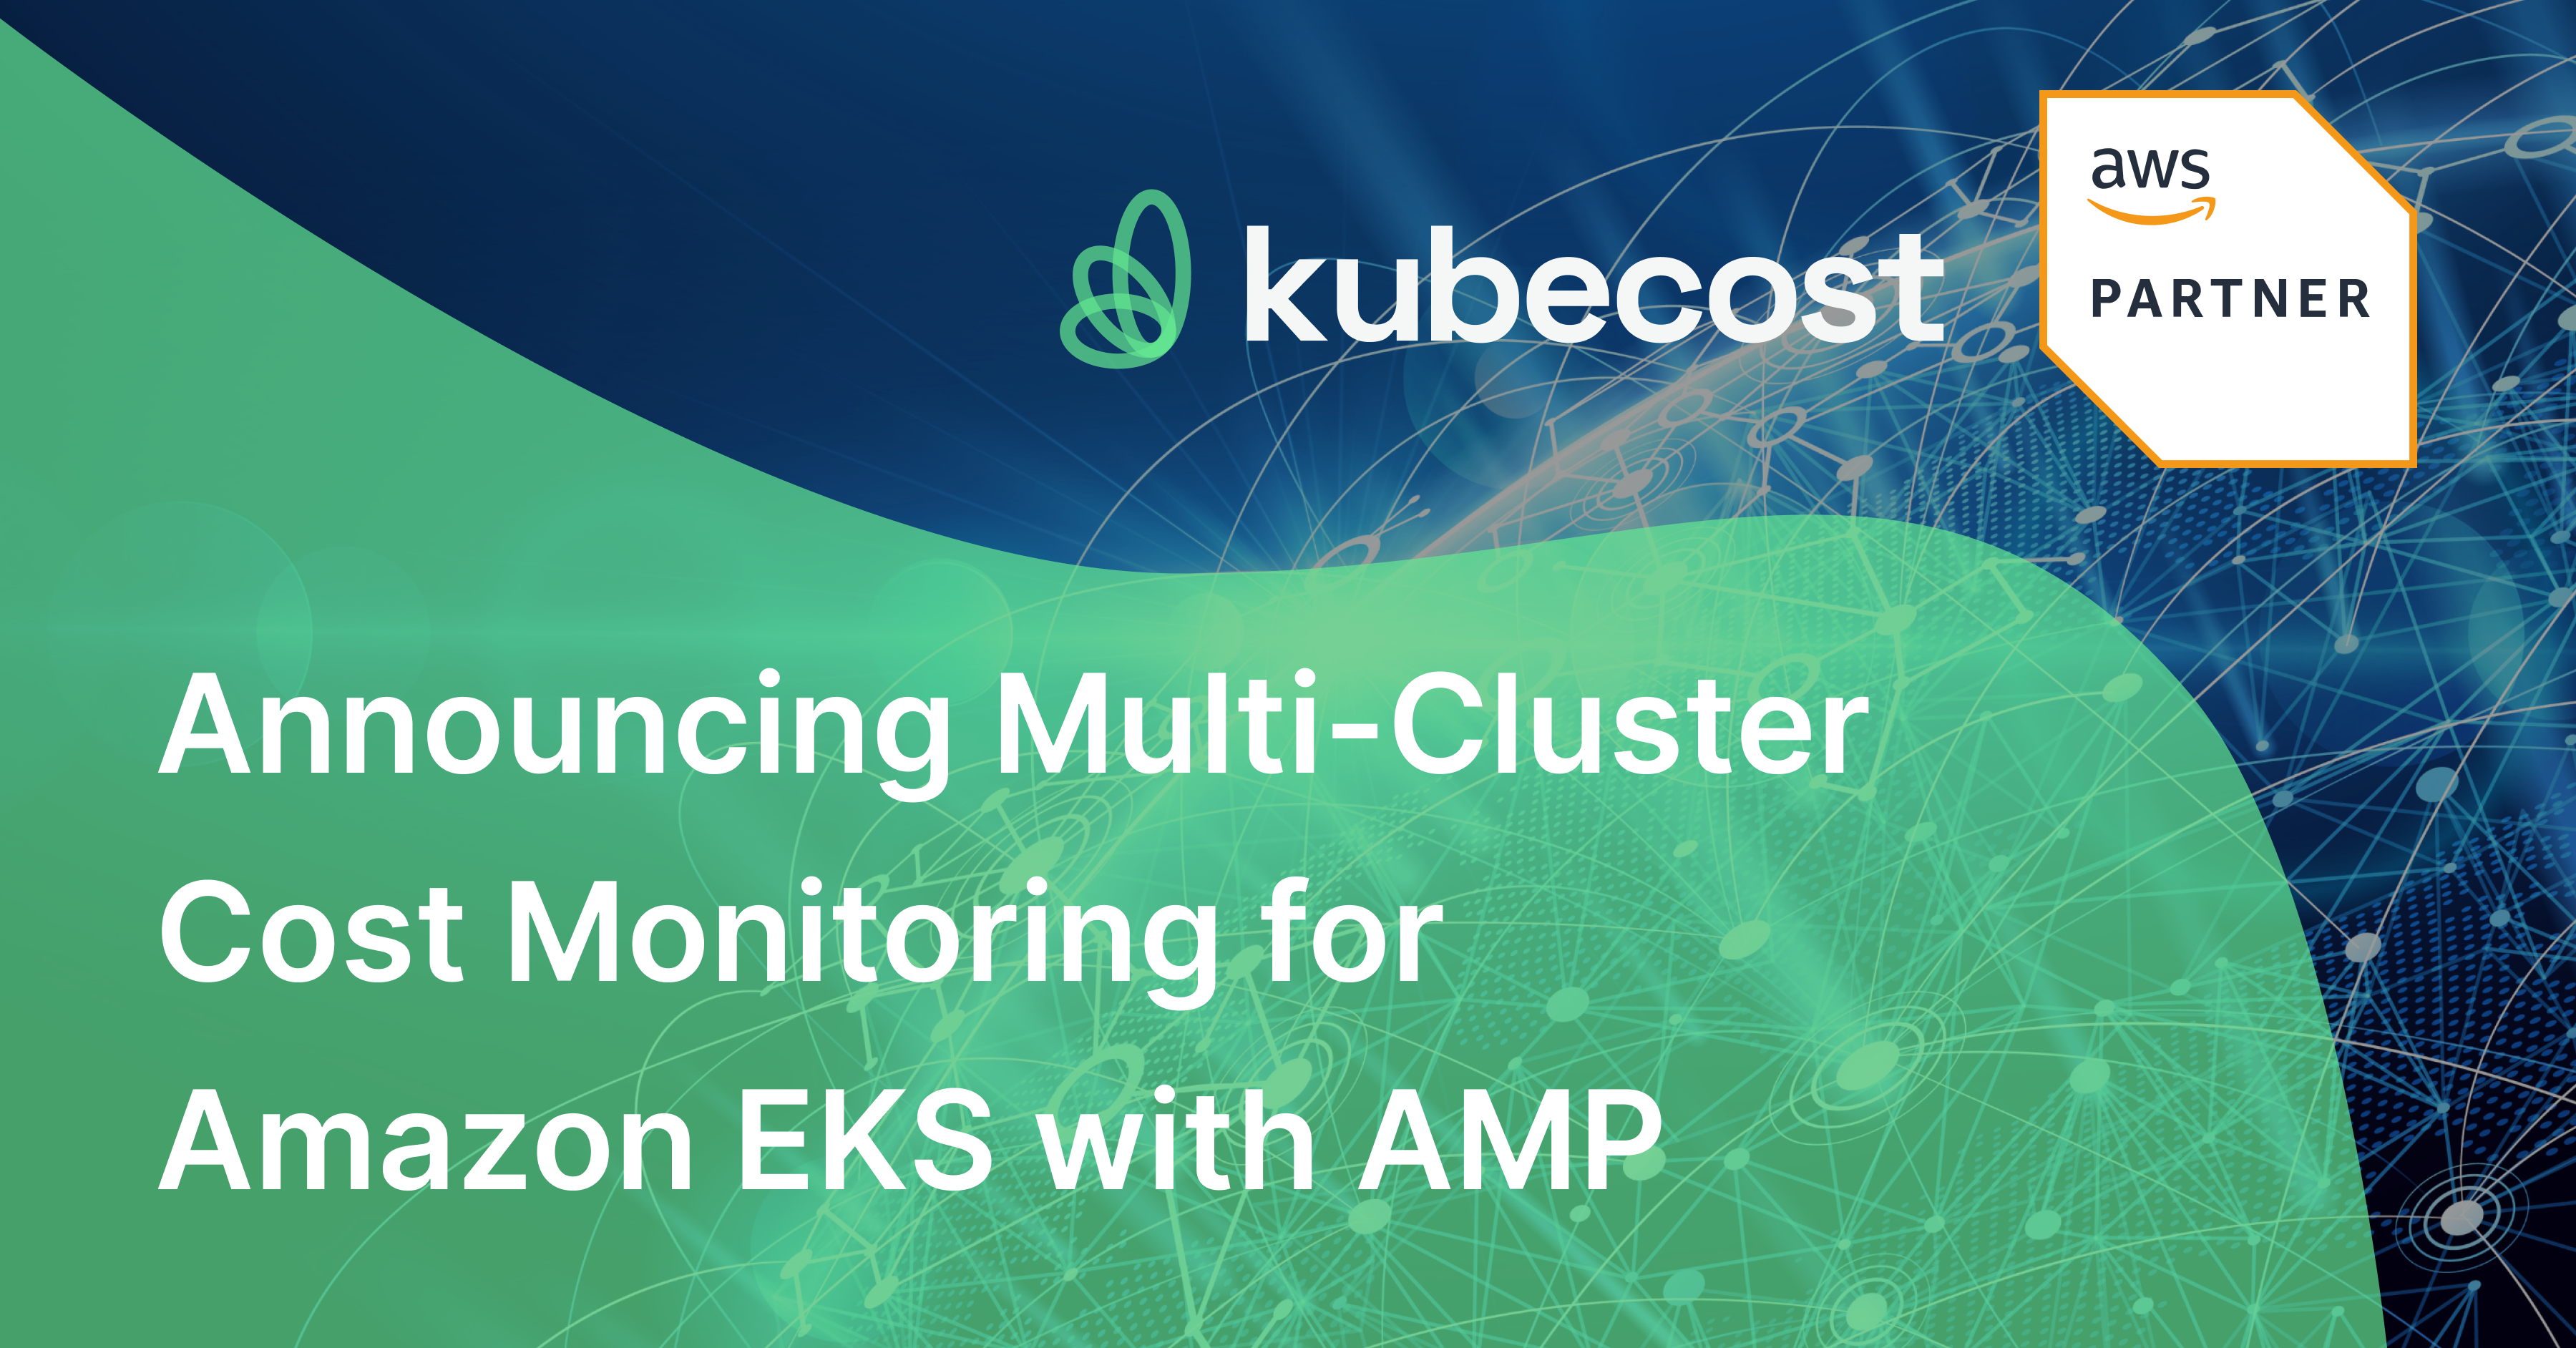 Announcing Multi-Cluster Cost Monitoring for Amazon EKS with AMP